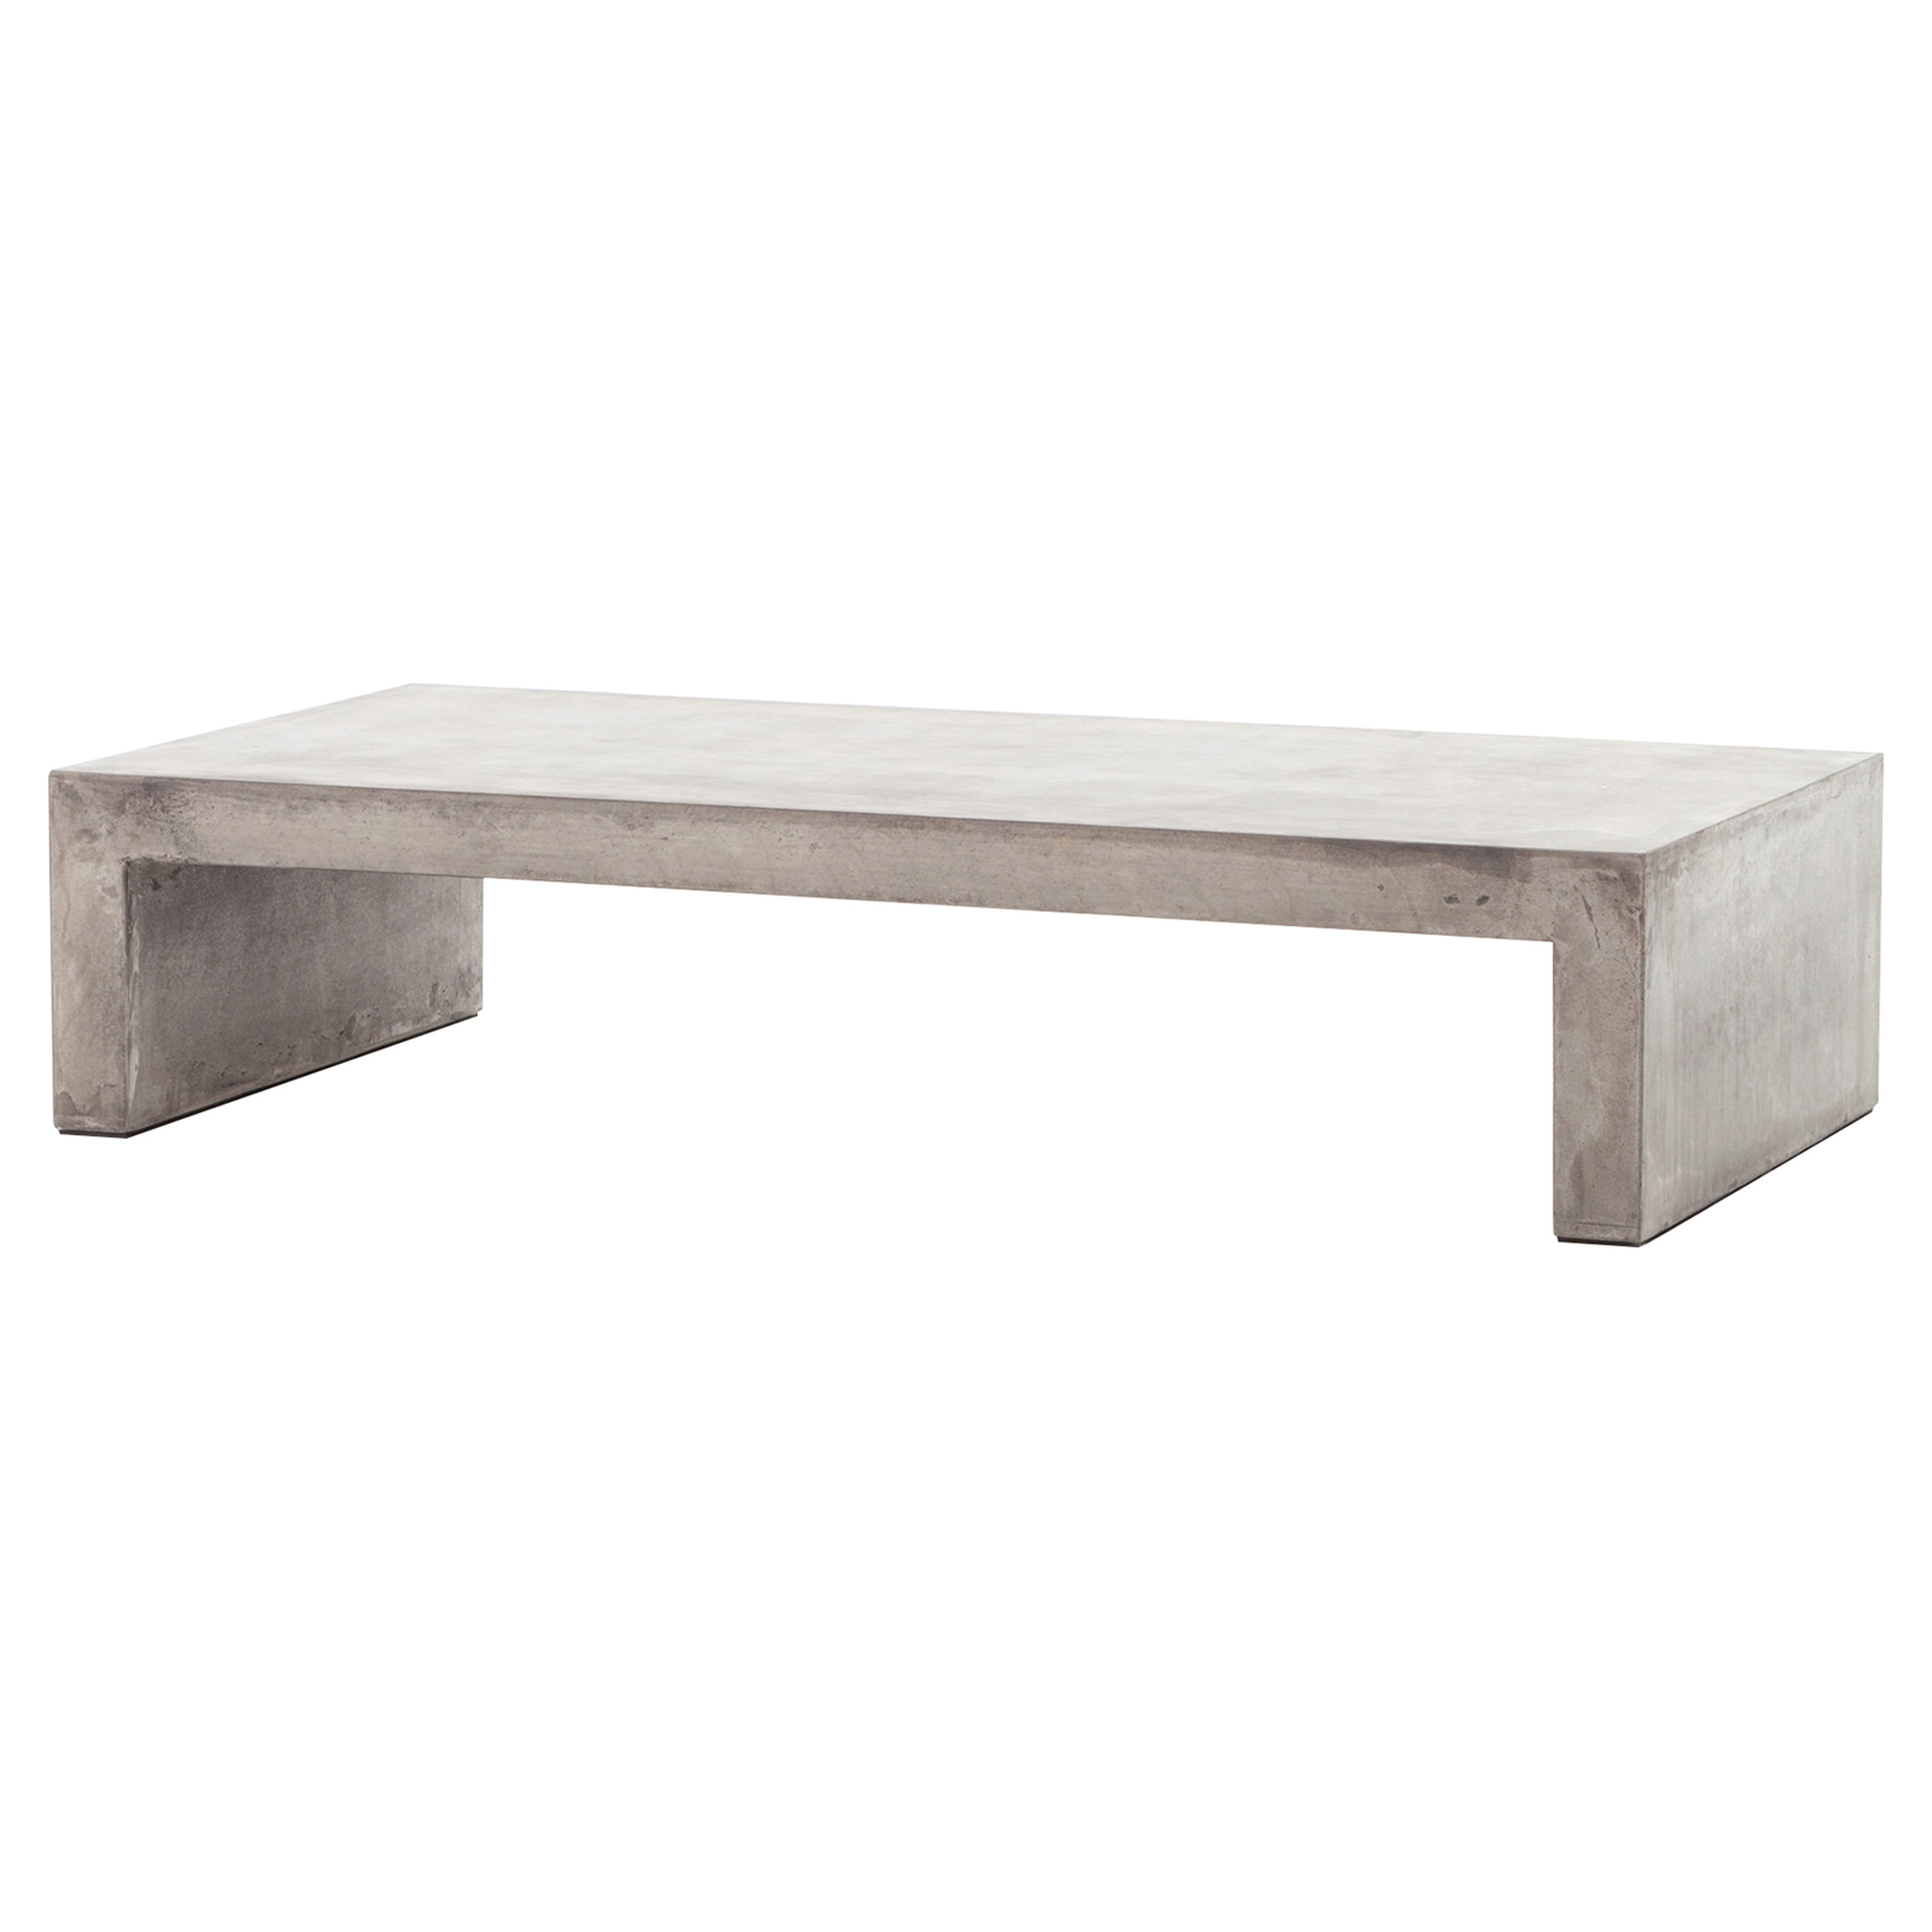 Hanz Industrial Loft Grey Block Concrete Coffee Table - Kathy Kuo Home